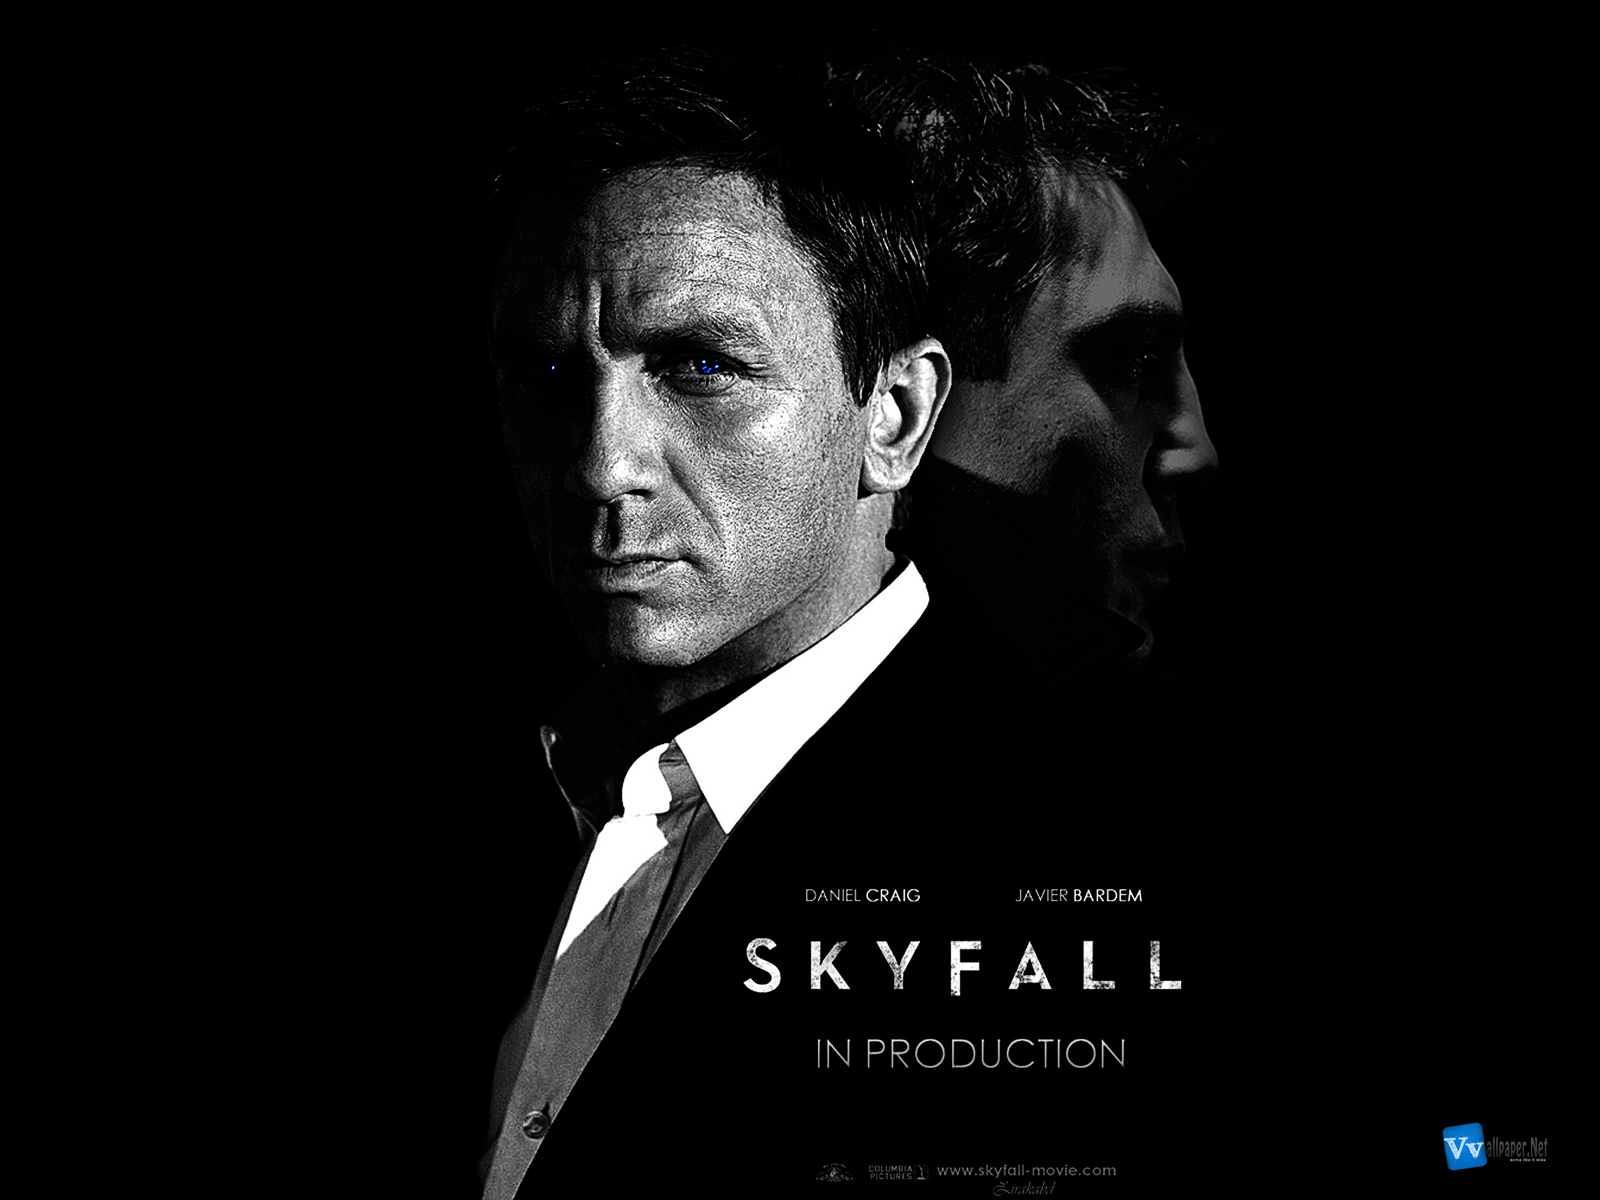 Skyfall 007 Movie Poster HD Wallpapers HQ Wallpapers - Free Wallpapers ...